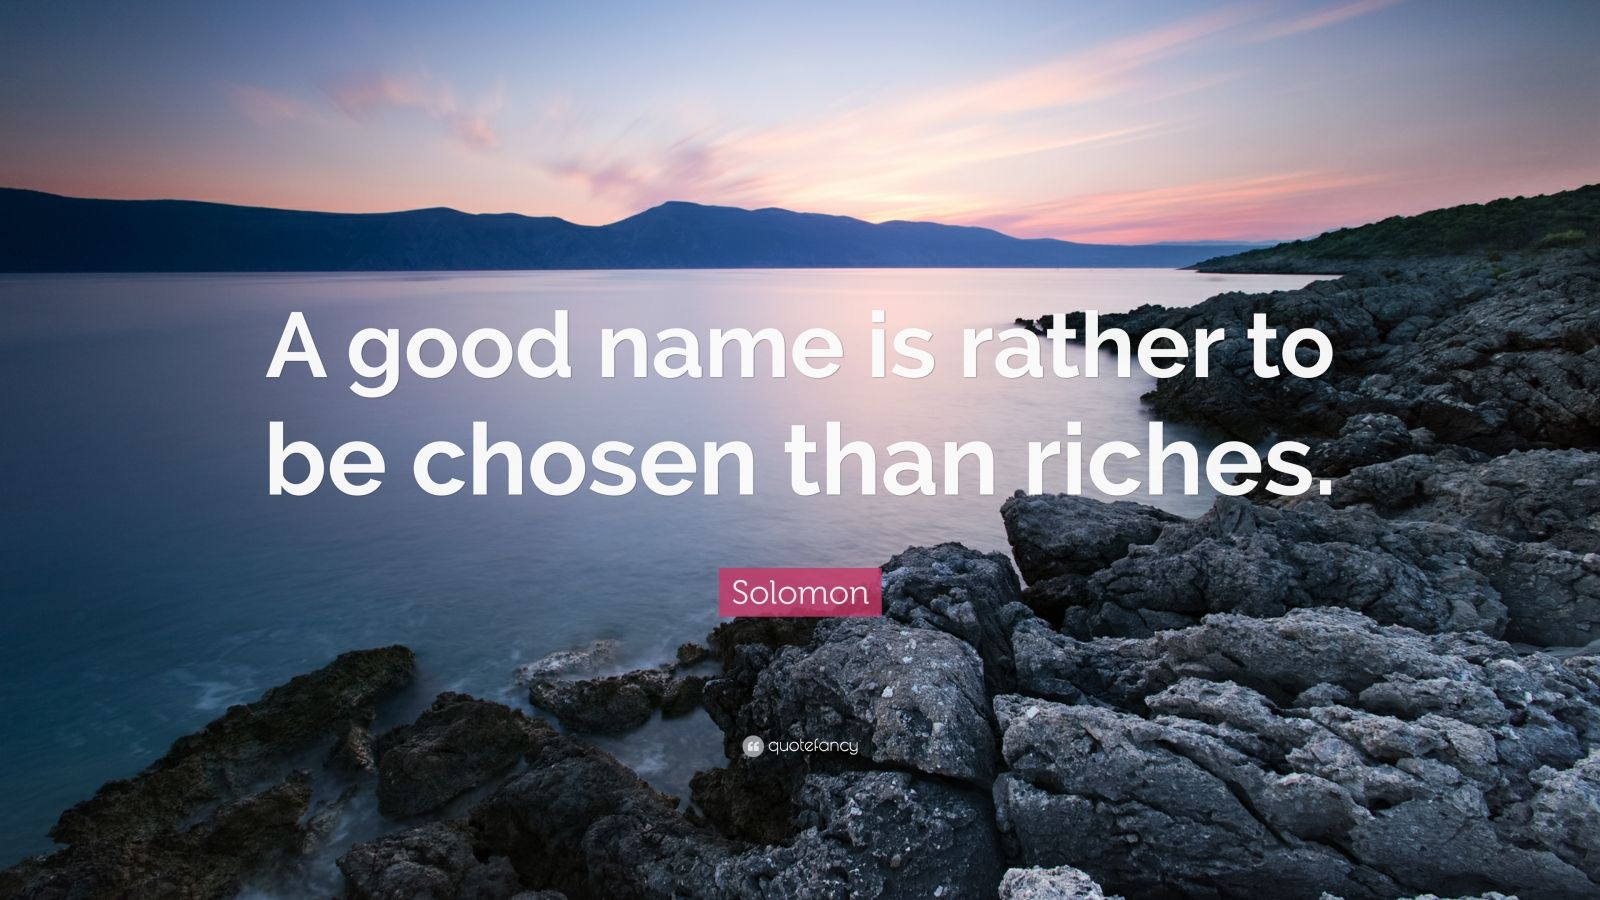 narrative essay on a good name is better than riches